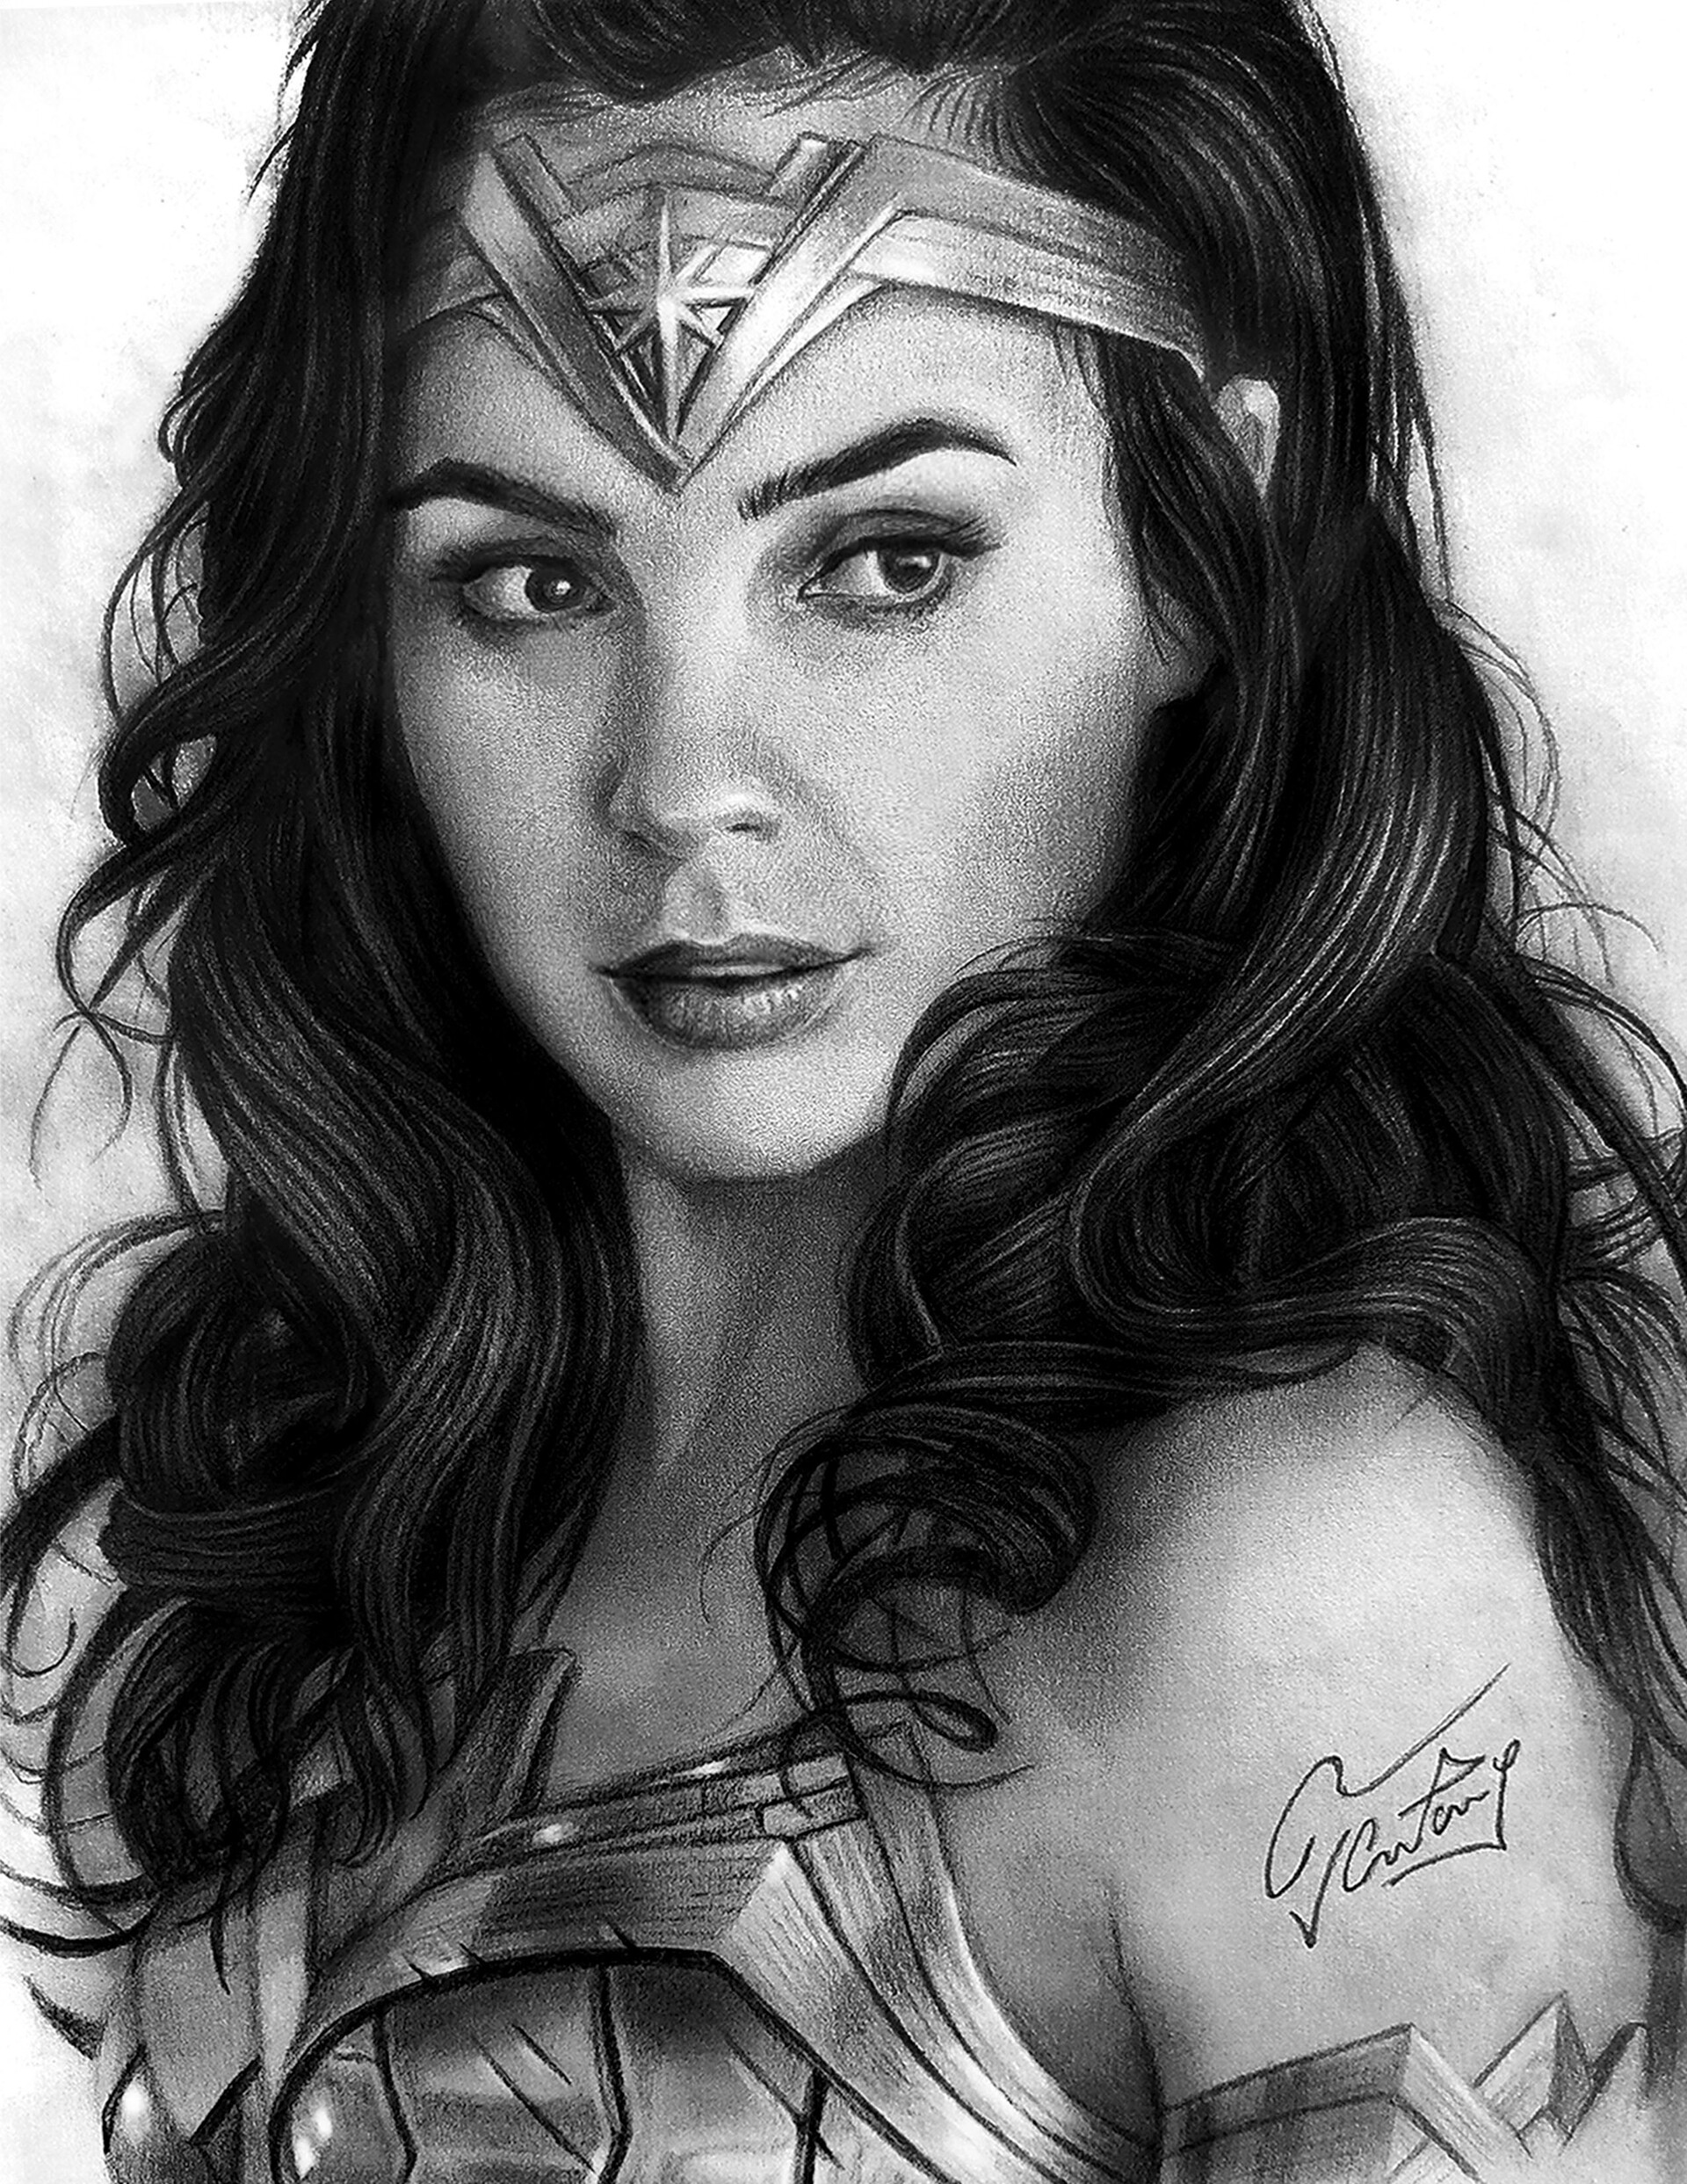 sweaty-mink214: add outline of the drawing, modifying features of wonder  woman